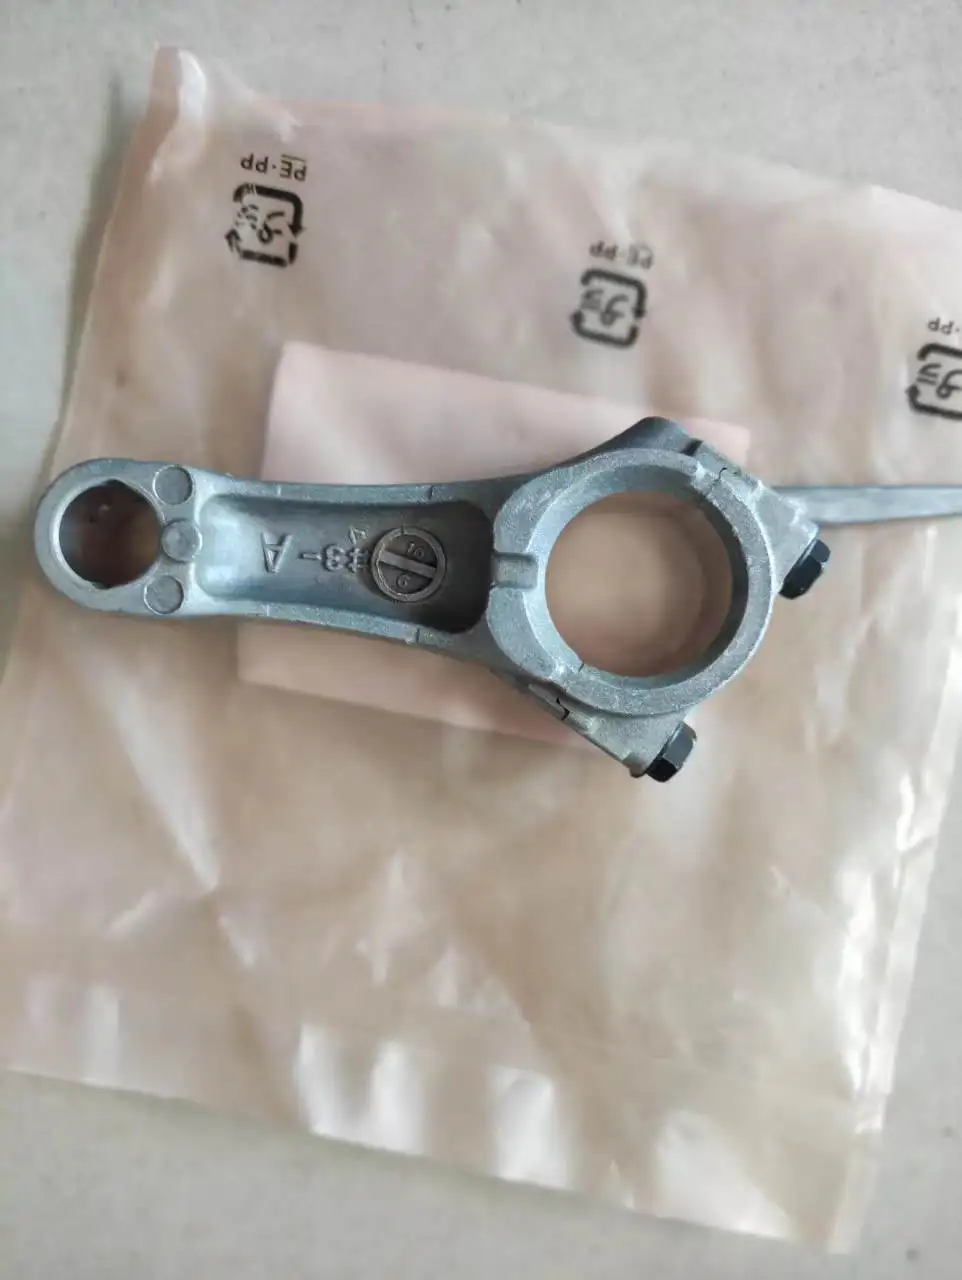 

CONNECTING ROD CONROD FITS GX100 GASOLINE ENGINE PARTS 13200-Z0D-000